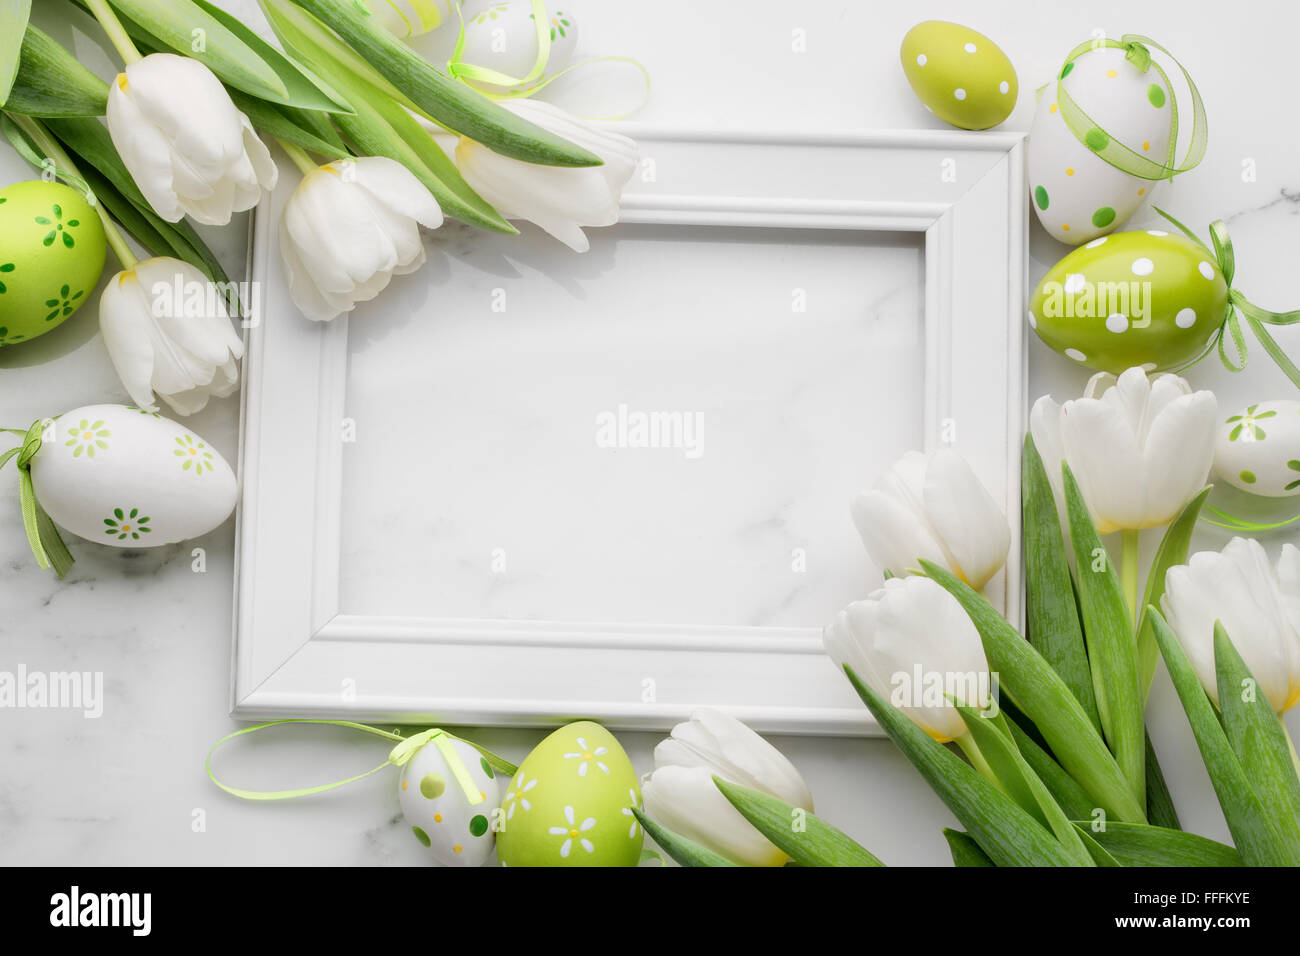 Tulip,easter eggs and blank picture frame on white marble background Stock Photo